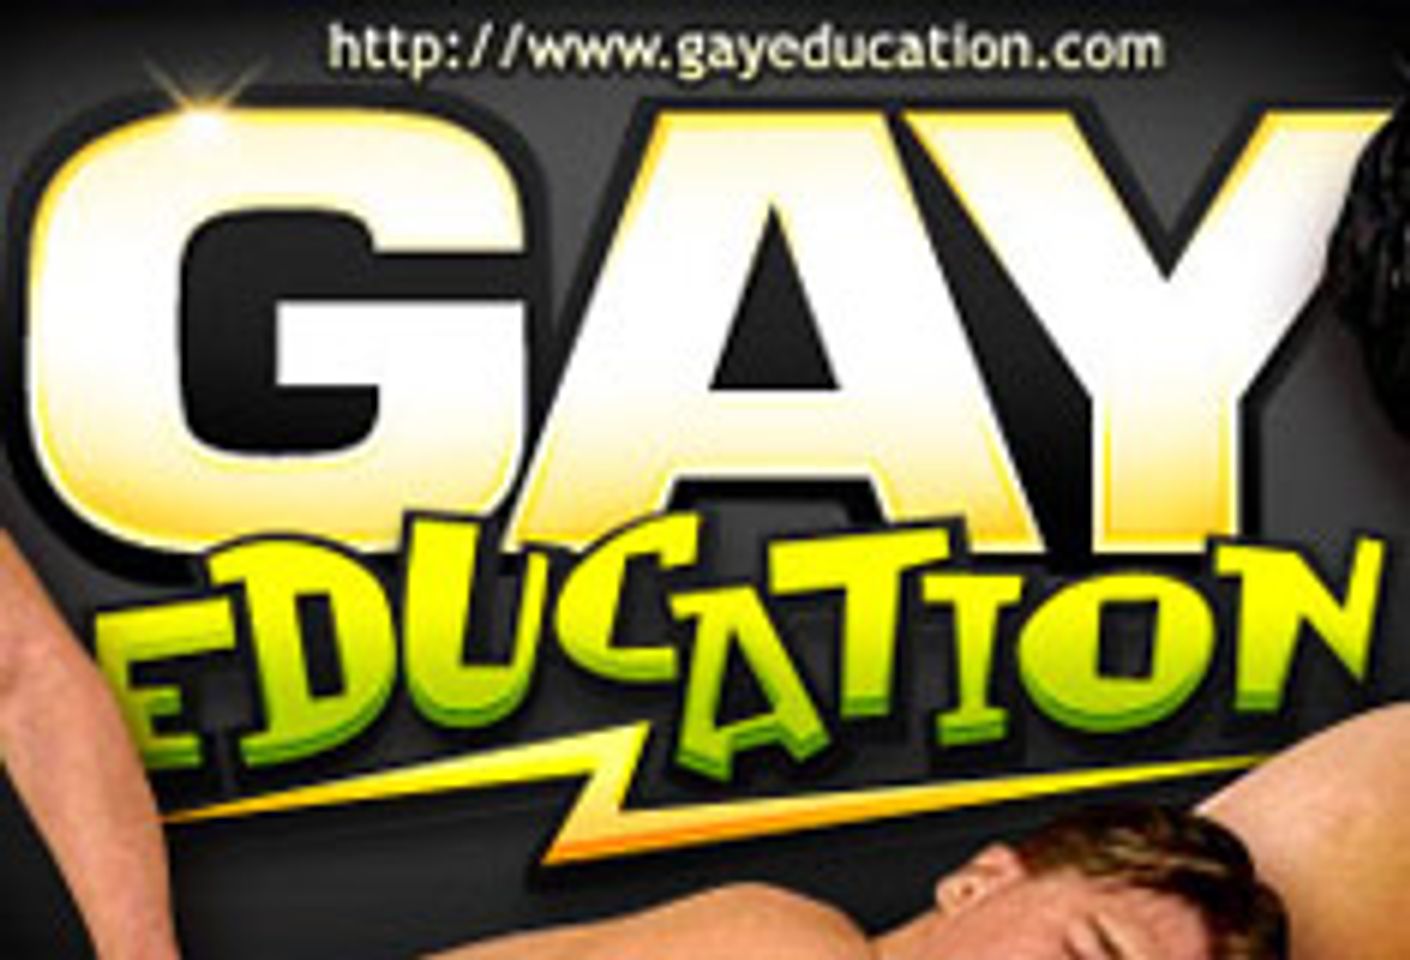 Slickcash Offers a Degree in Gay Education